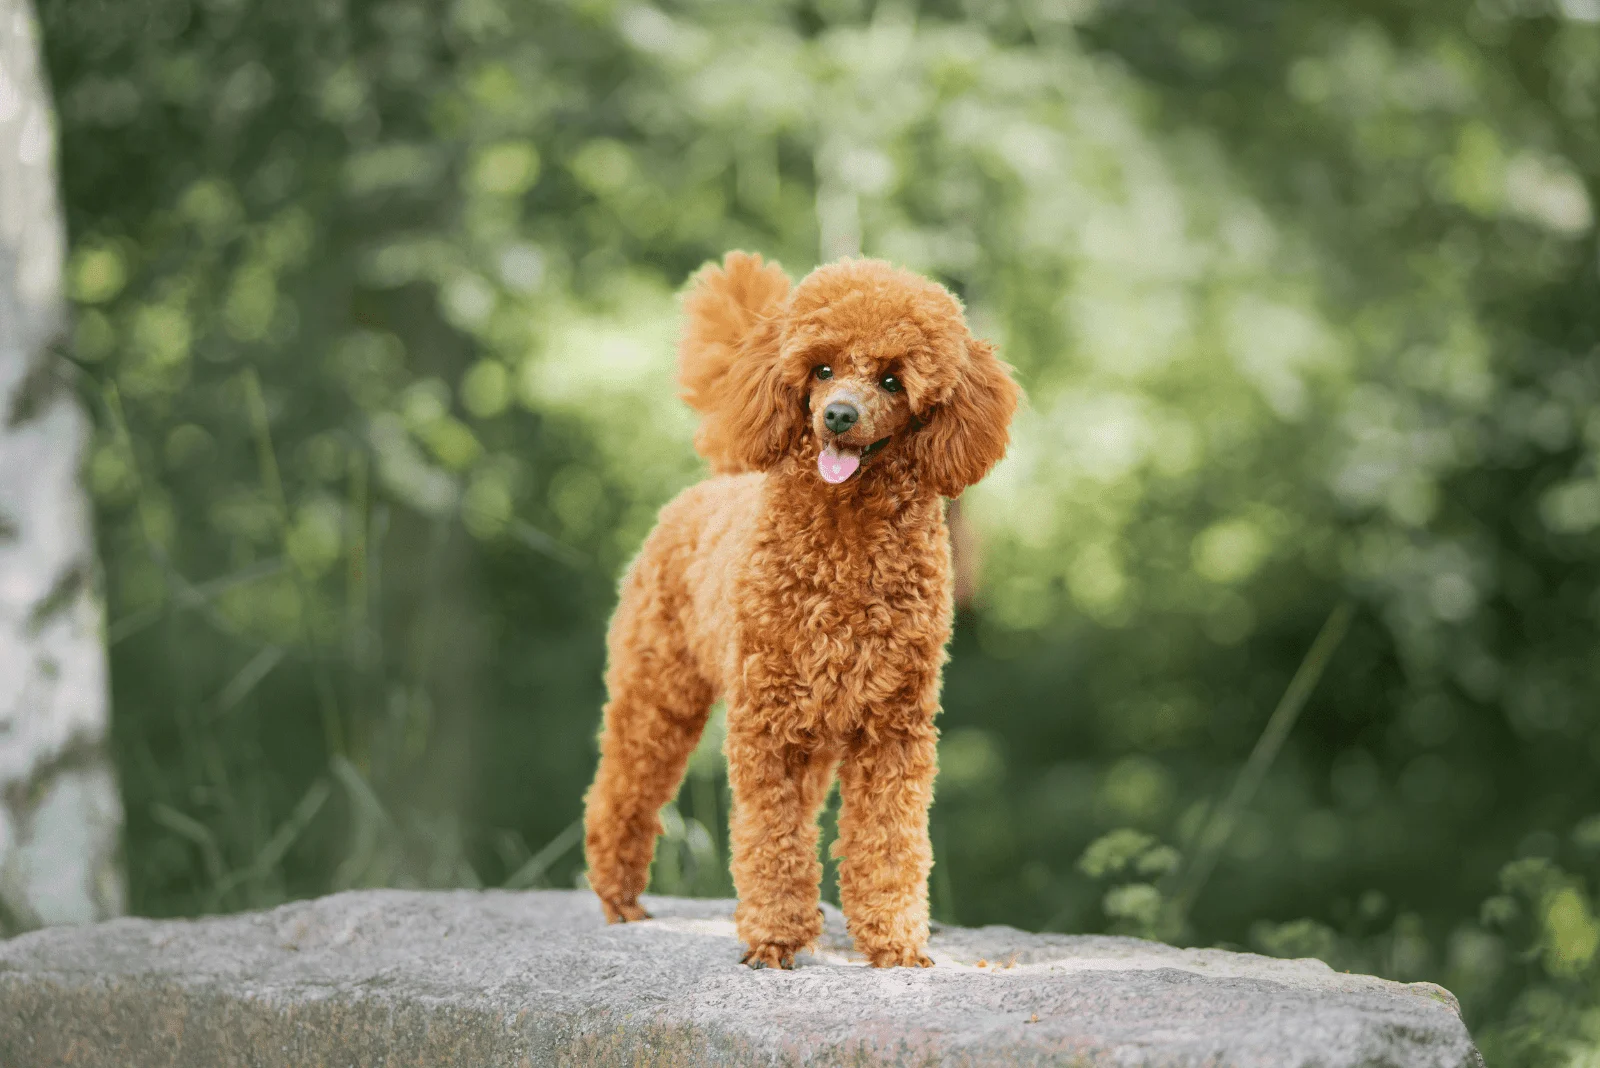 the poodle is standing on a stone